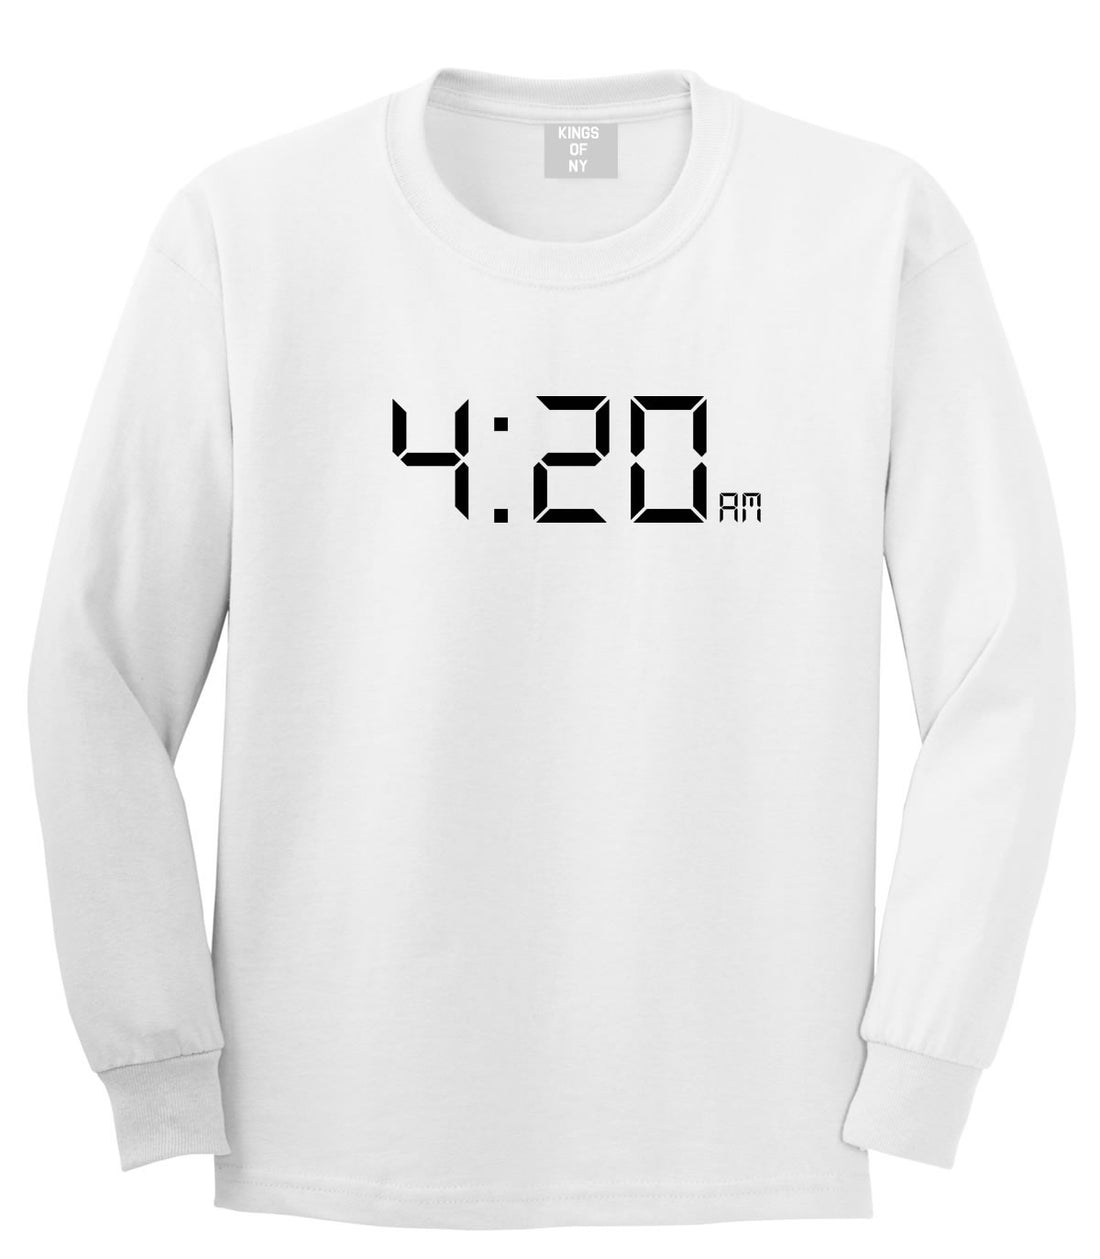 420 Time Weed Somker Long Sleeve T-Shirt in White By Kings Of NY